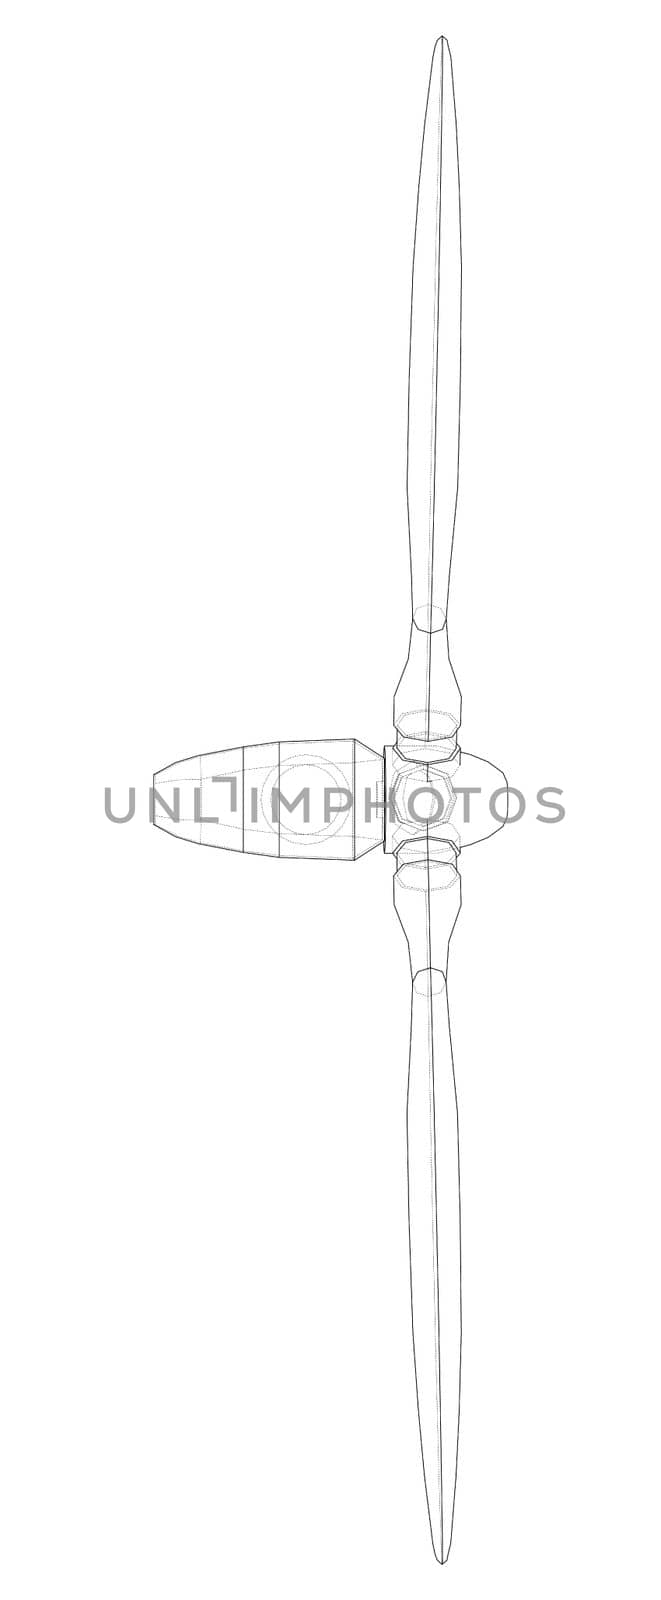 Wind turbine. 3d illustration. Wire-frame style. The layers of visible and invisible lines are separated